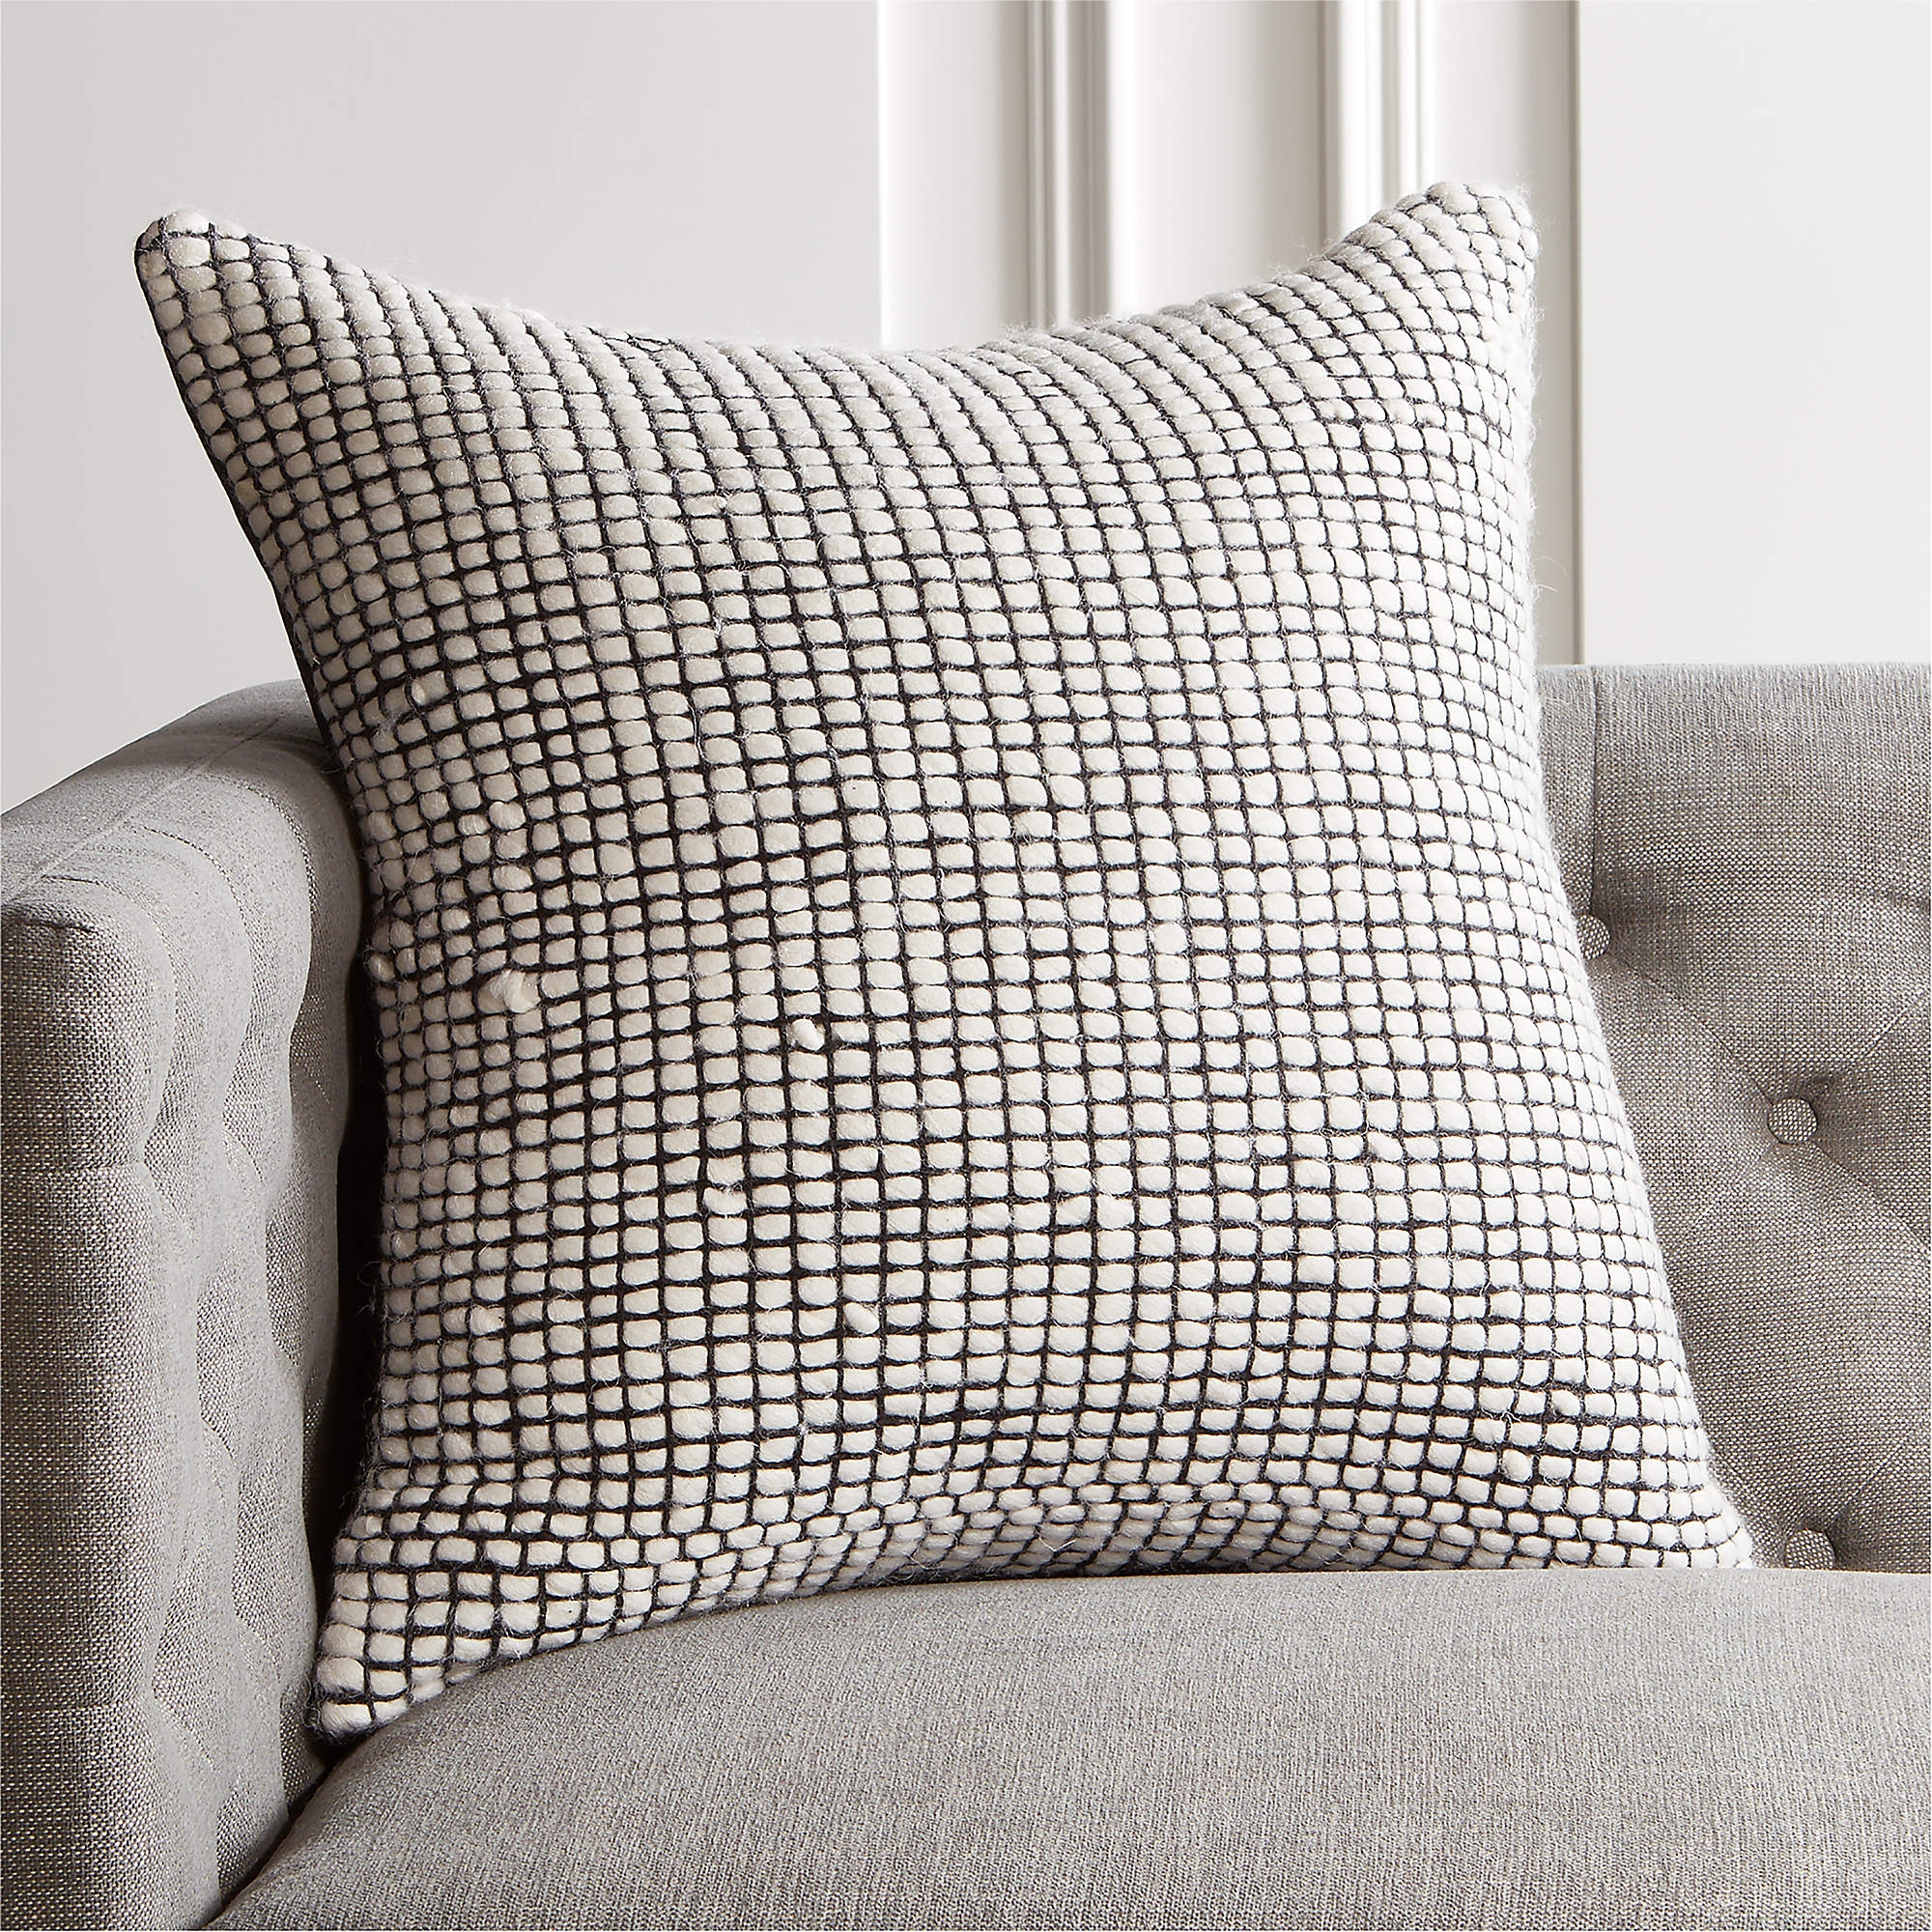 Keelie Ivory Grid Throw Pillow with Down-Alternative Insert 23" - Image 1